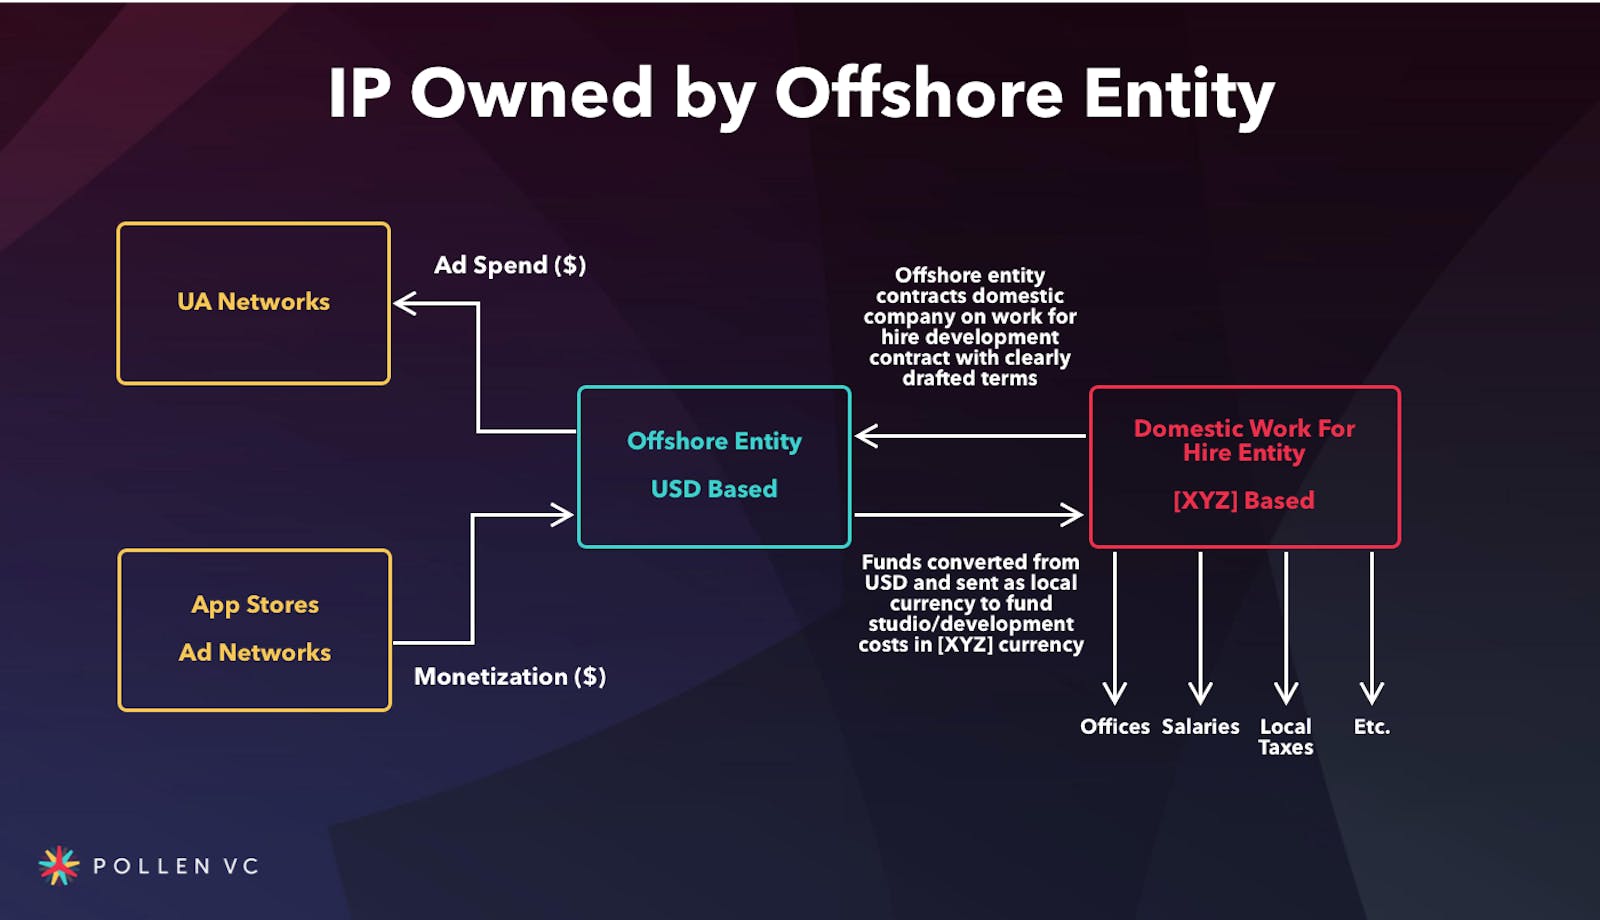 IP owned by offshore entity